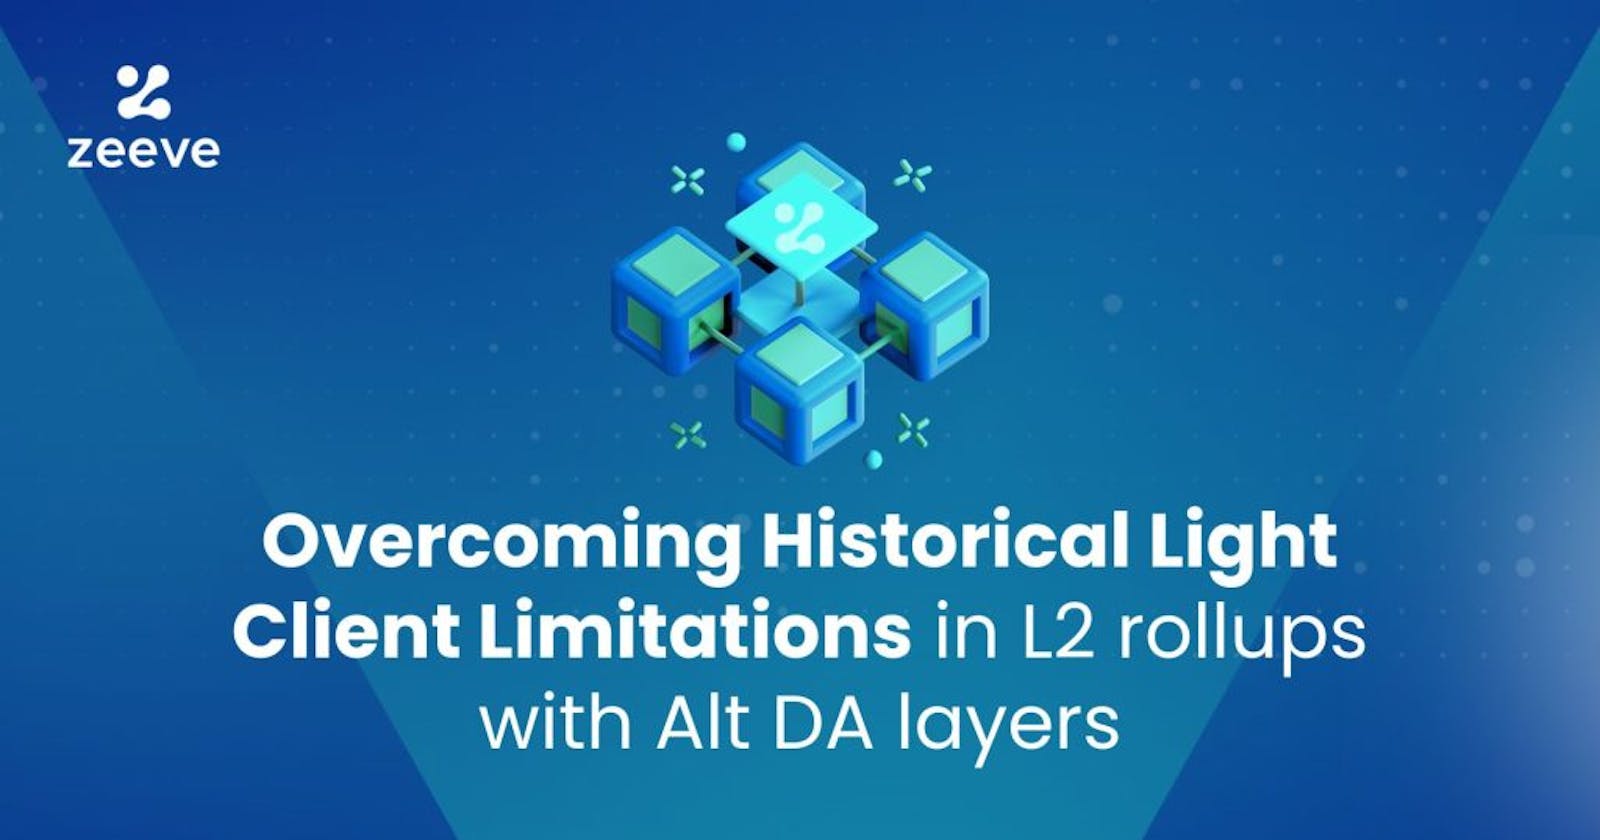 Overcoming Historical Light Client Limitations in L2 rollups with Alt DA layers